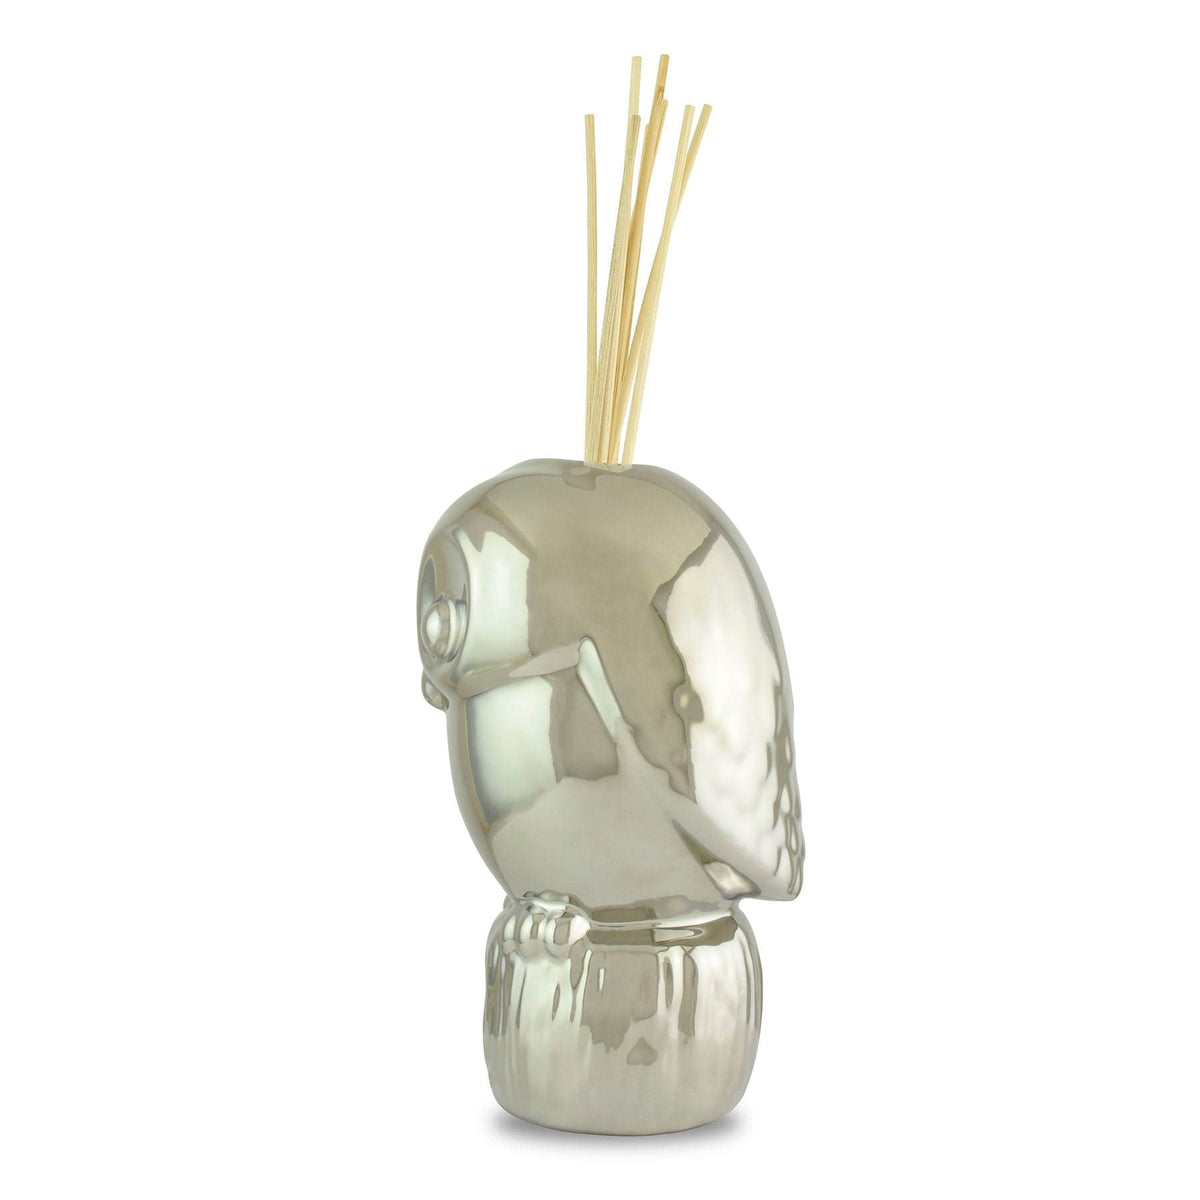 Hysses Home Scents Bubo Owl Ceramic Reed Diffuser Vase